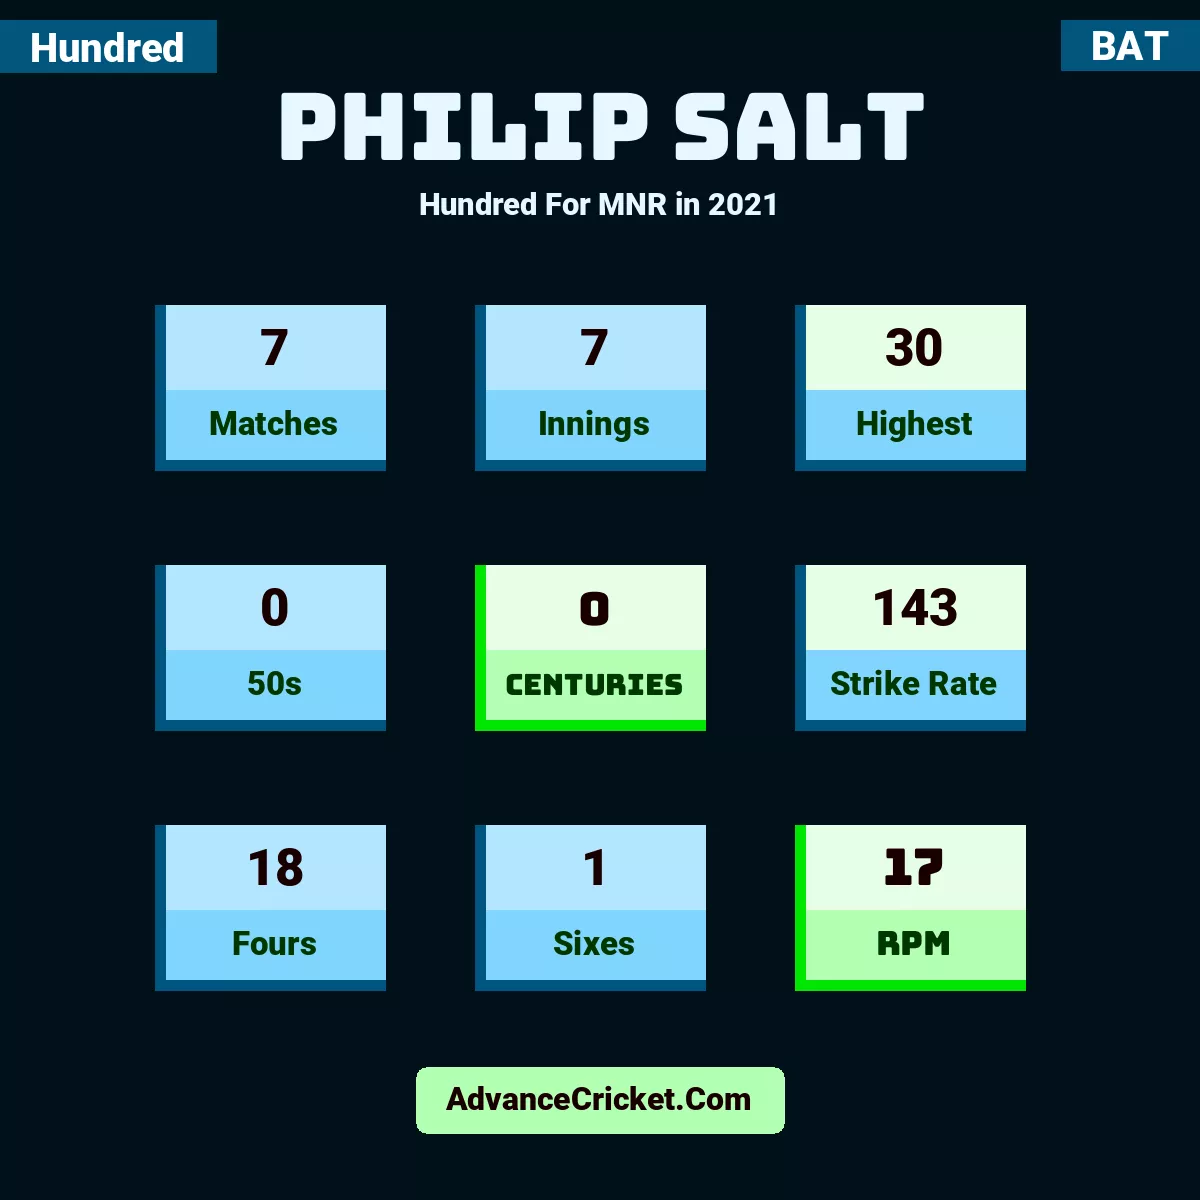 Philip Salt Hundred  For MNR in 2021, Philip Salt played 7 matches, scored 30 runs as highest, 0 half-centuries, and 0 centuries, with a strike rate of 143. P.Salt hit 18 fours and 1 sixes, with an RPM of 17.